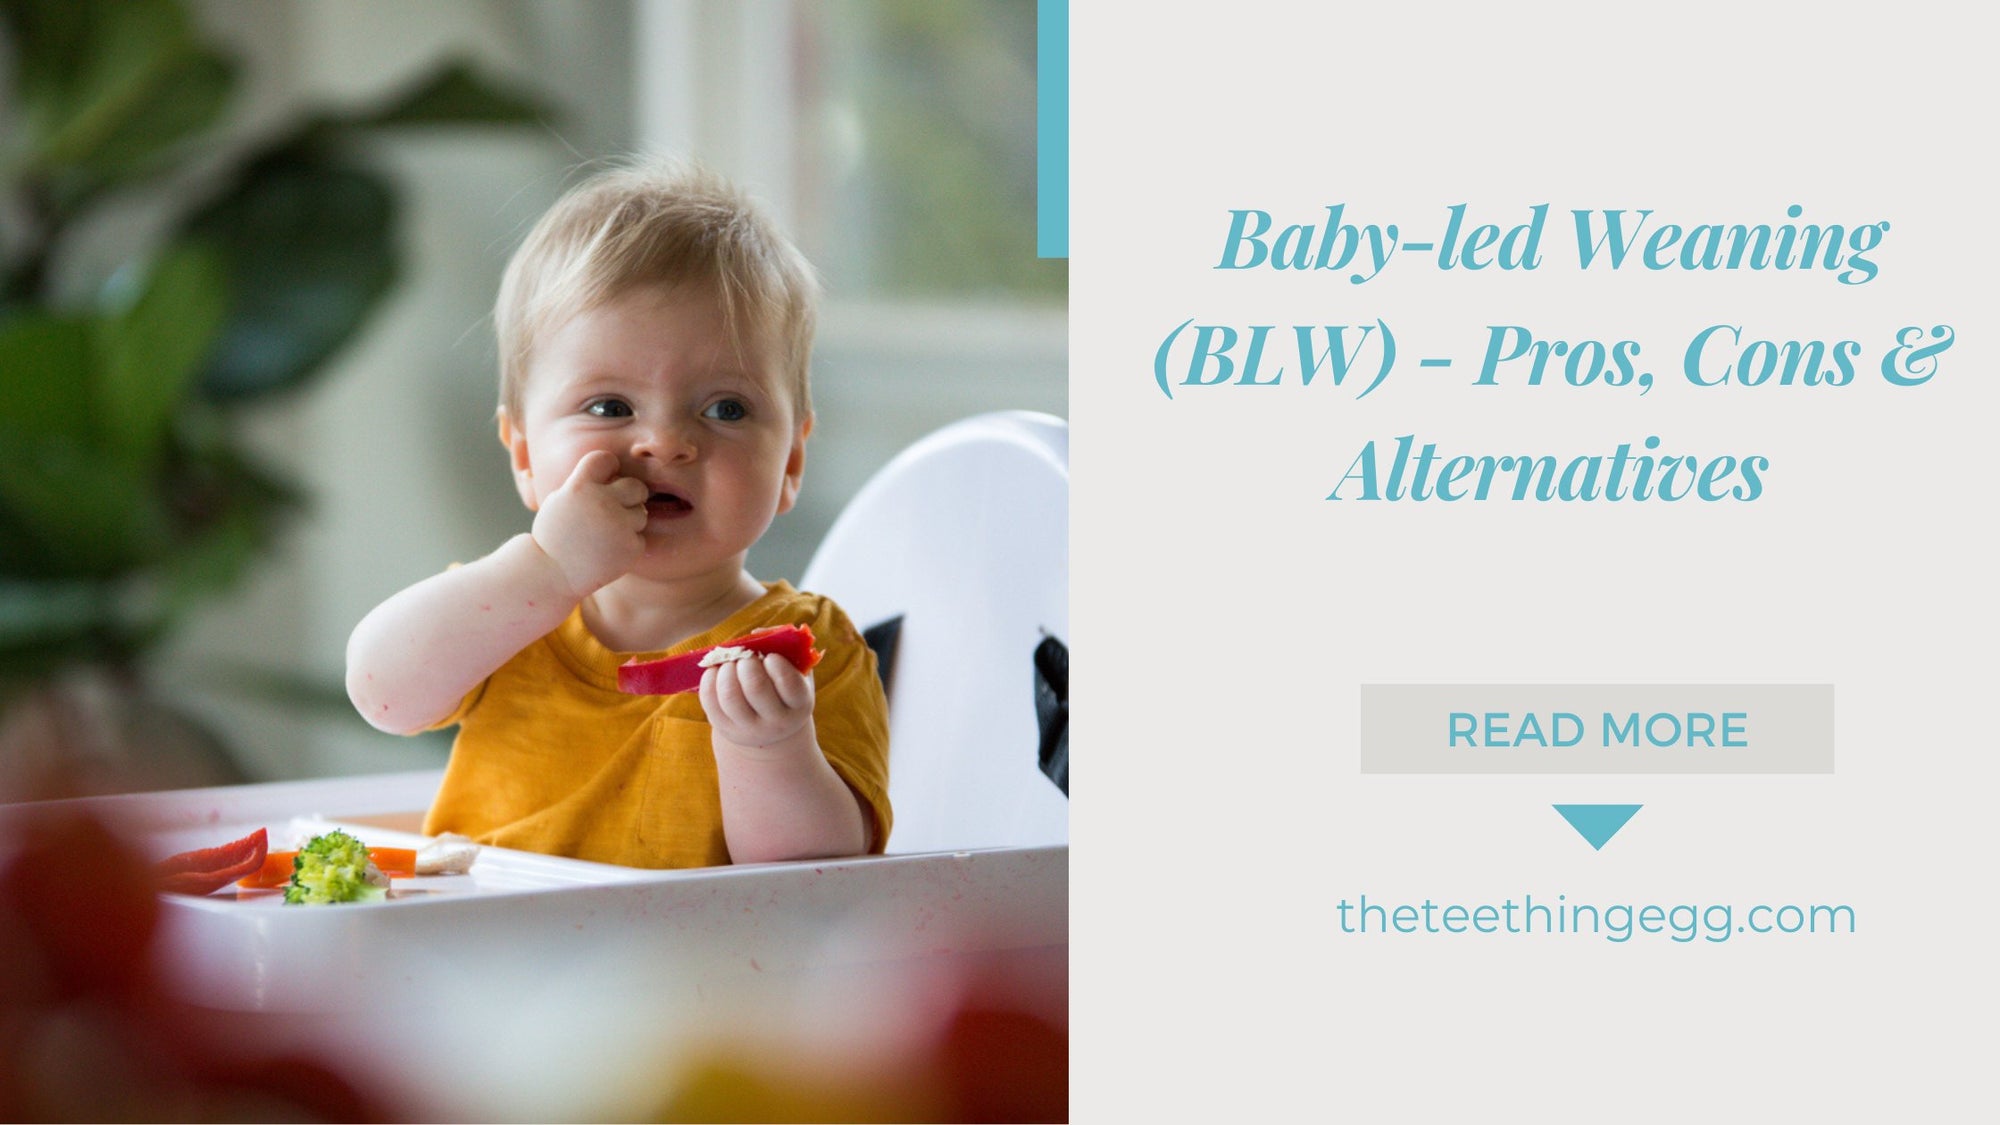 Baby-led Weaning (BLW) - Pros, Cons, Foods & Alternatives